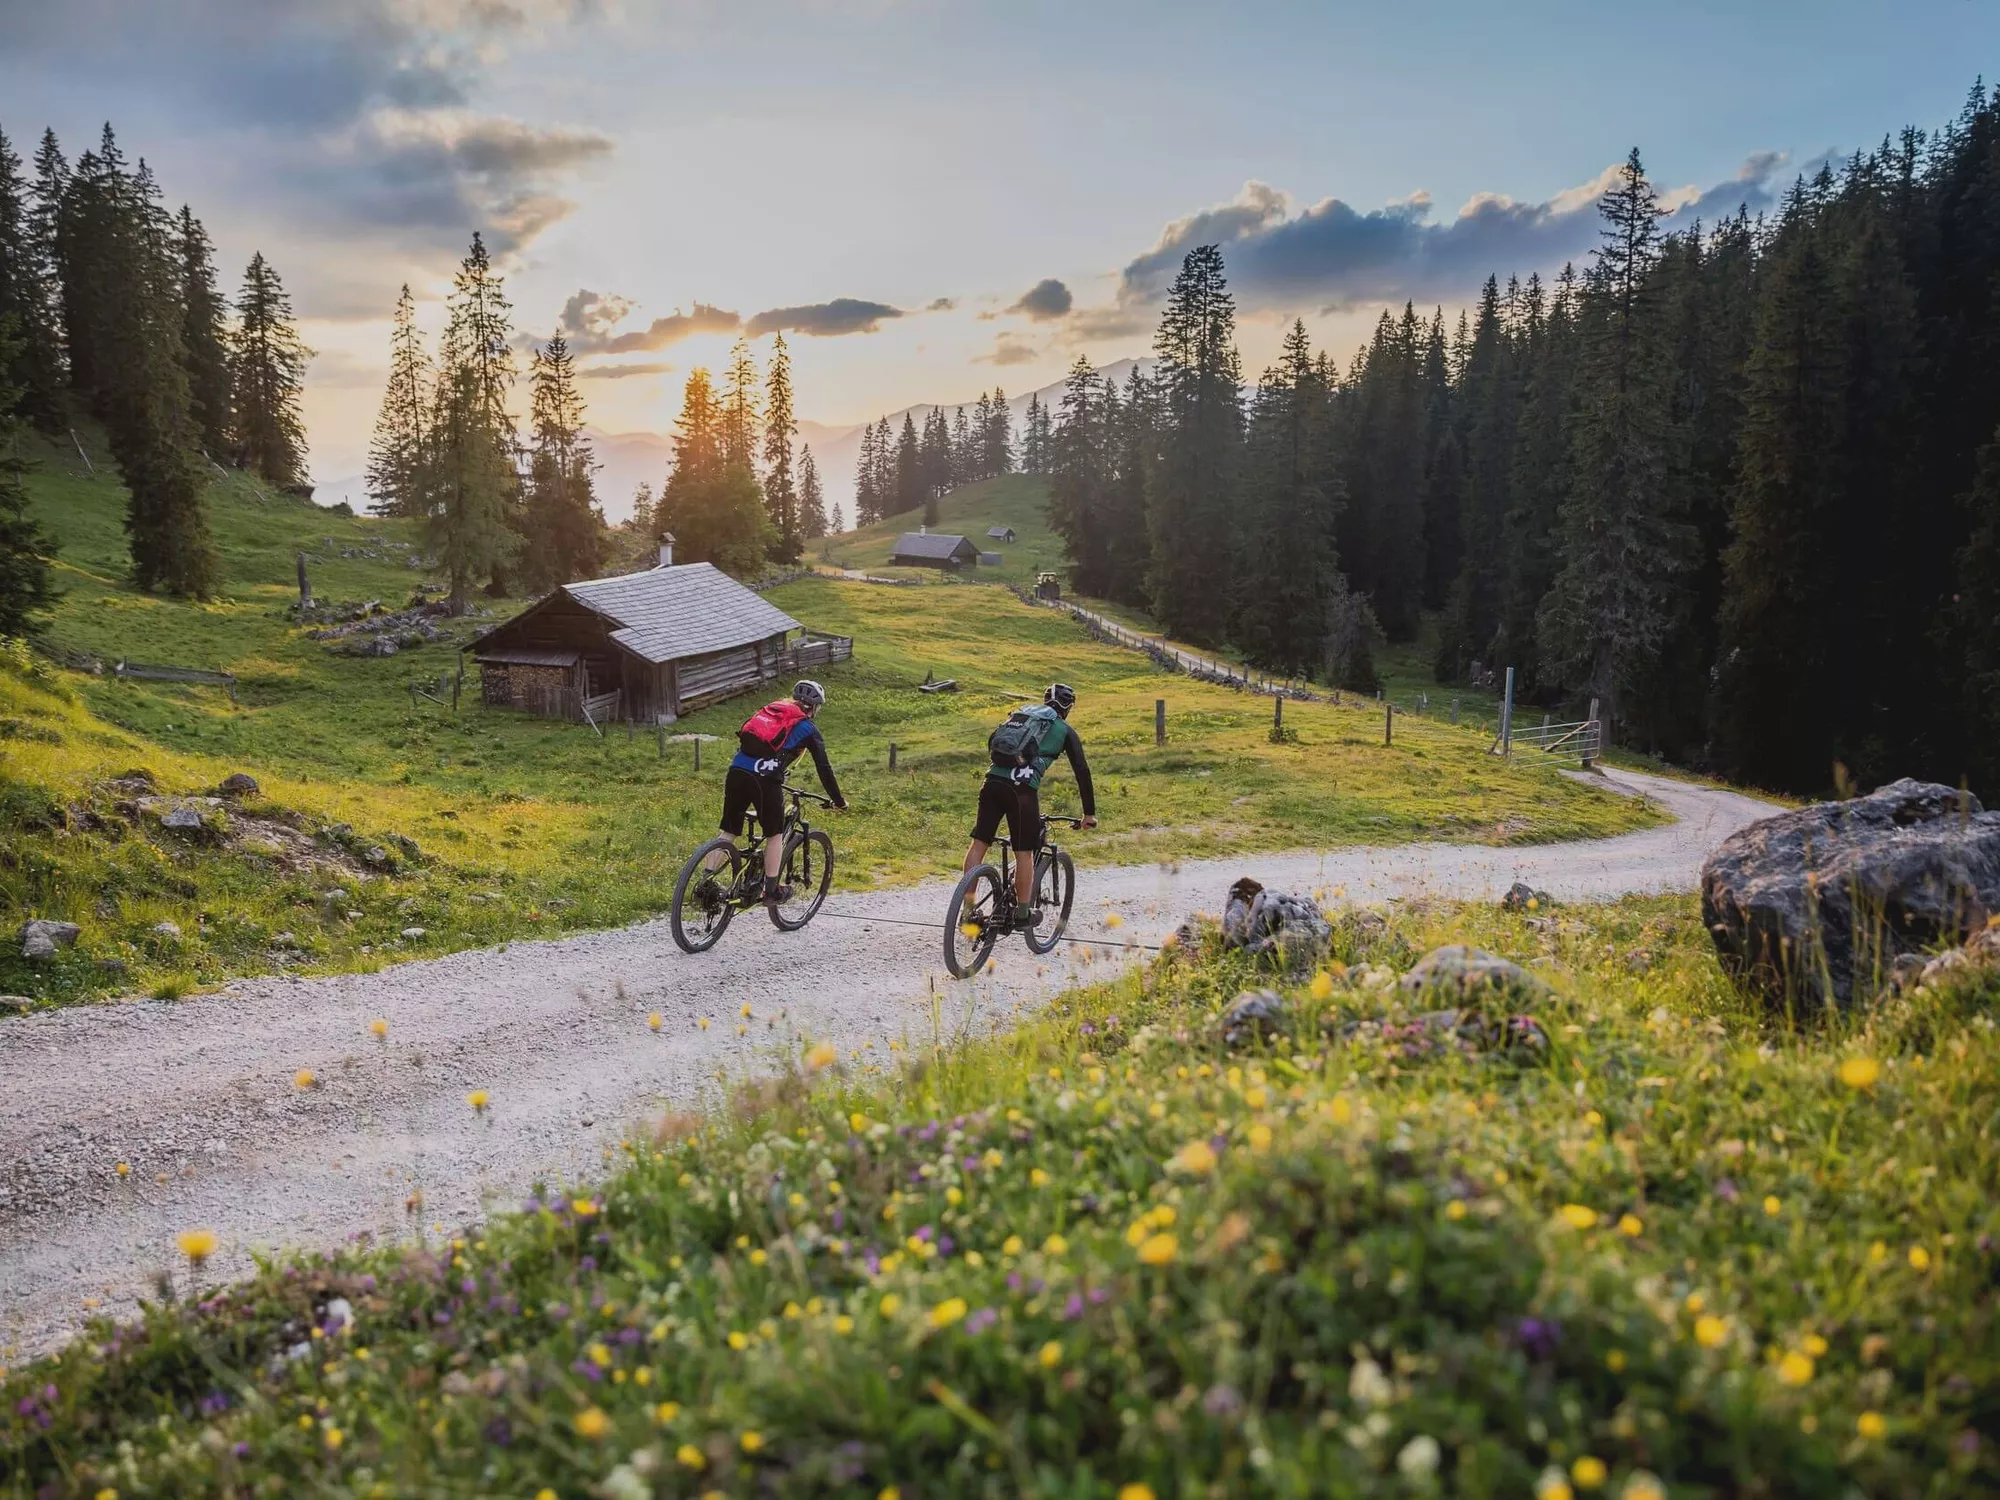 Mountain bikes on their way down to the valley, riding between huts and alpine pastures in the area of the Plankensteinalm in the Dachstein region (c) photo Medien GmbH / Andreas Meyer